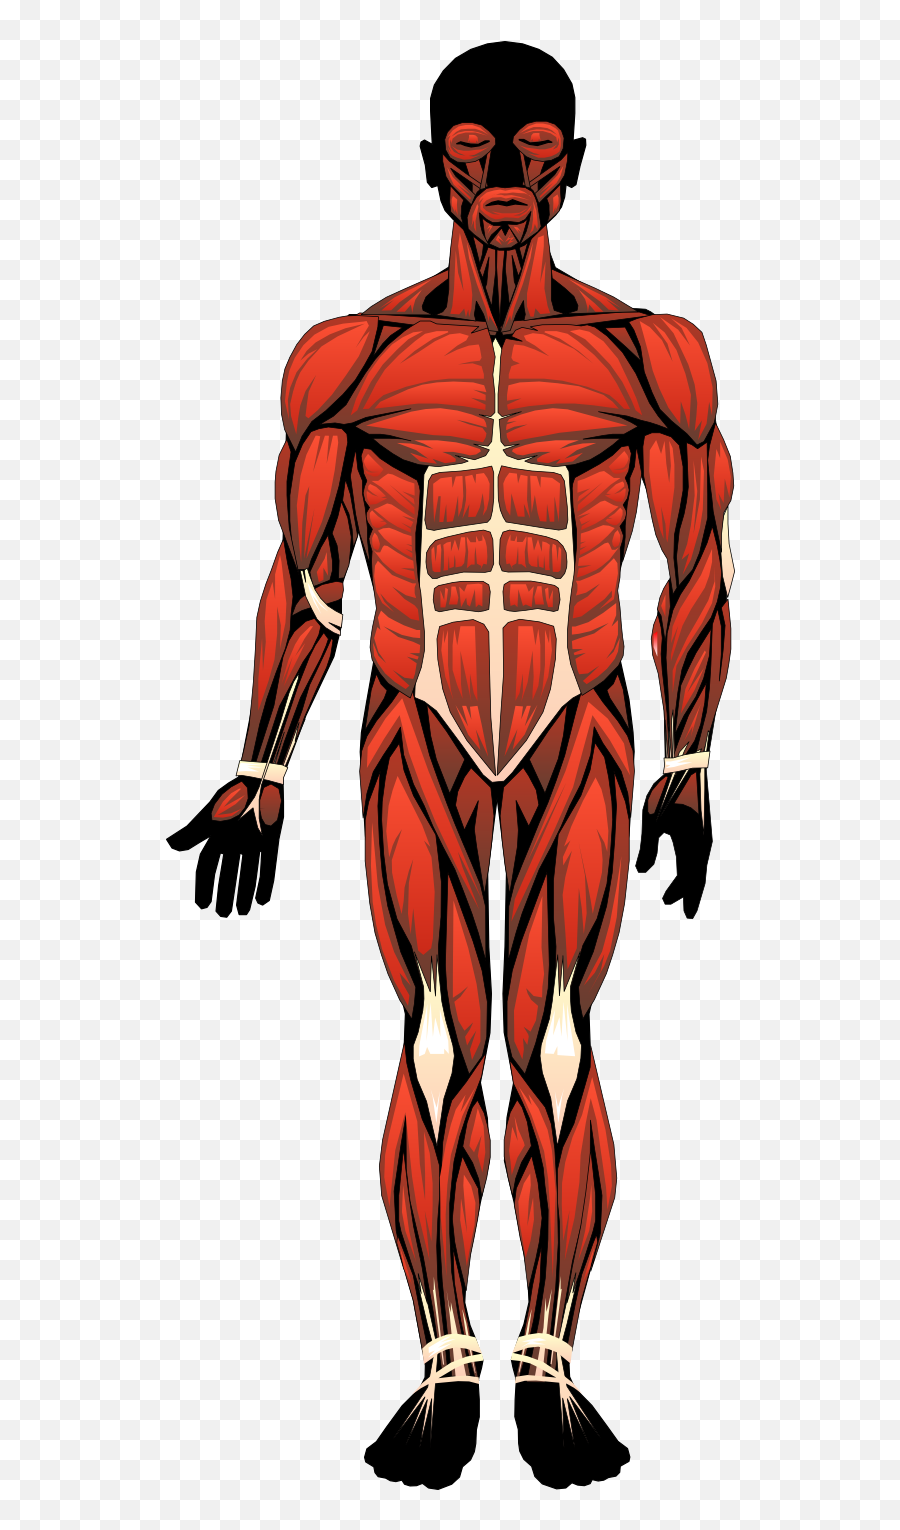 Anatomy Of Human Body Muscles Drawing Free Image Download - Human Anatomy Free Transparent Emoji,Human Emotions Body Pictures